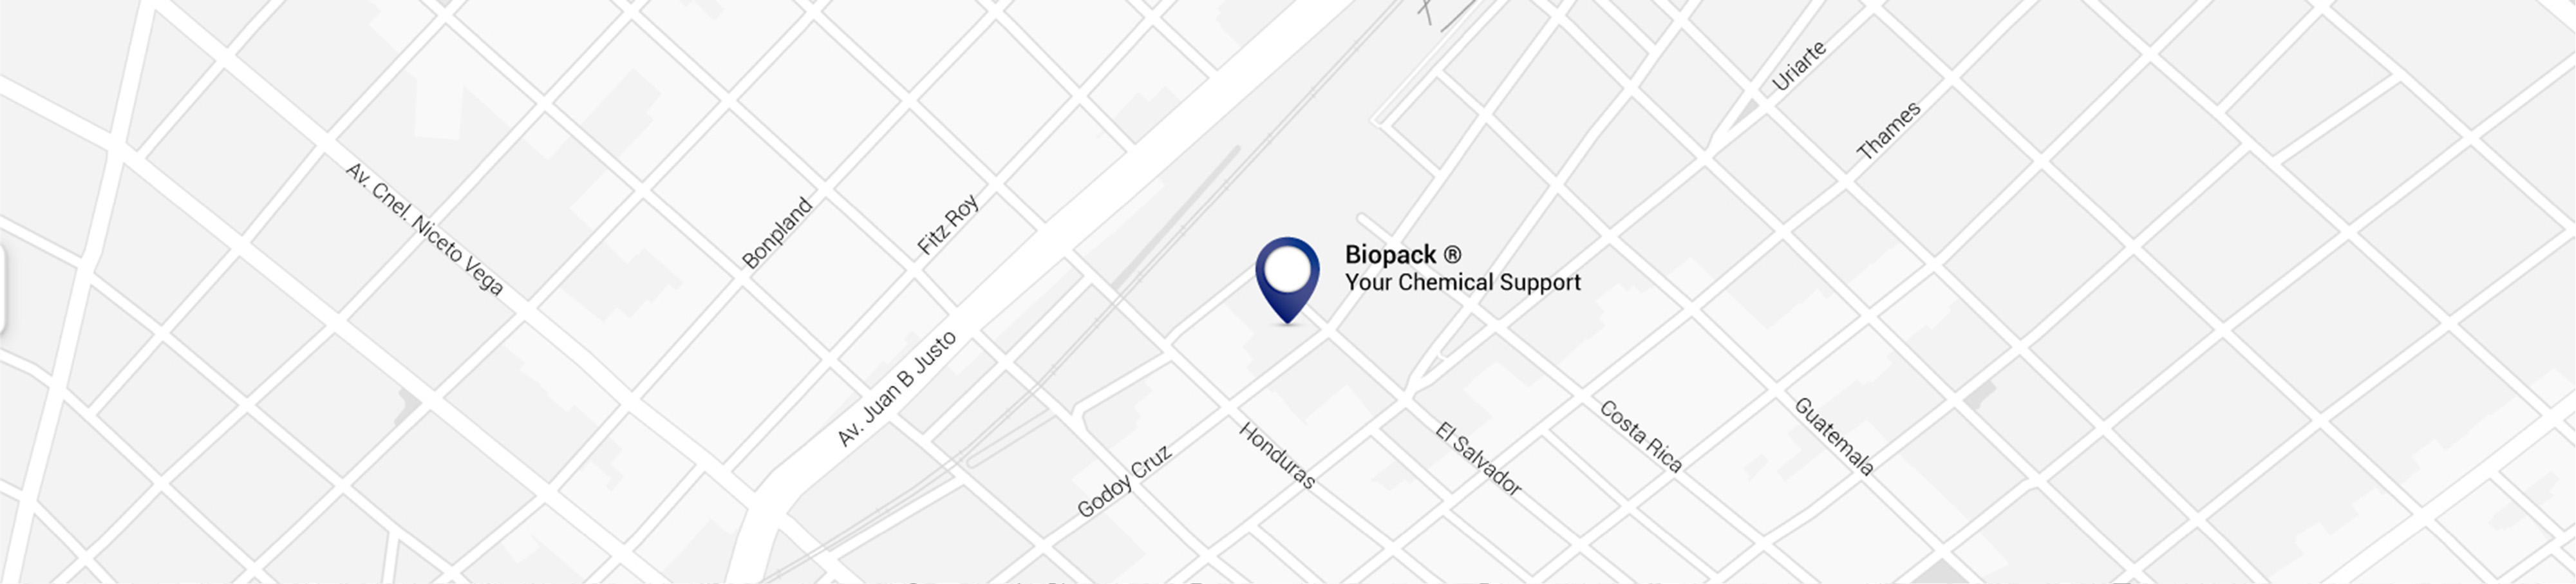 Biopack - Your Chemical Support